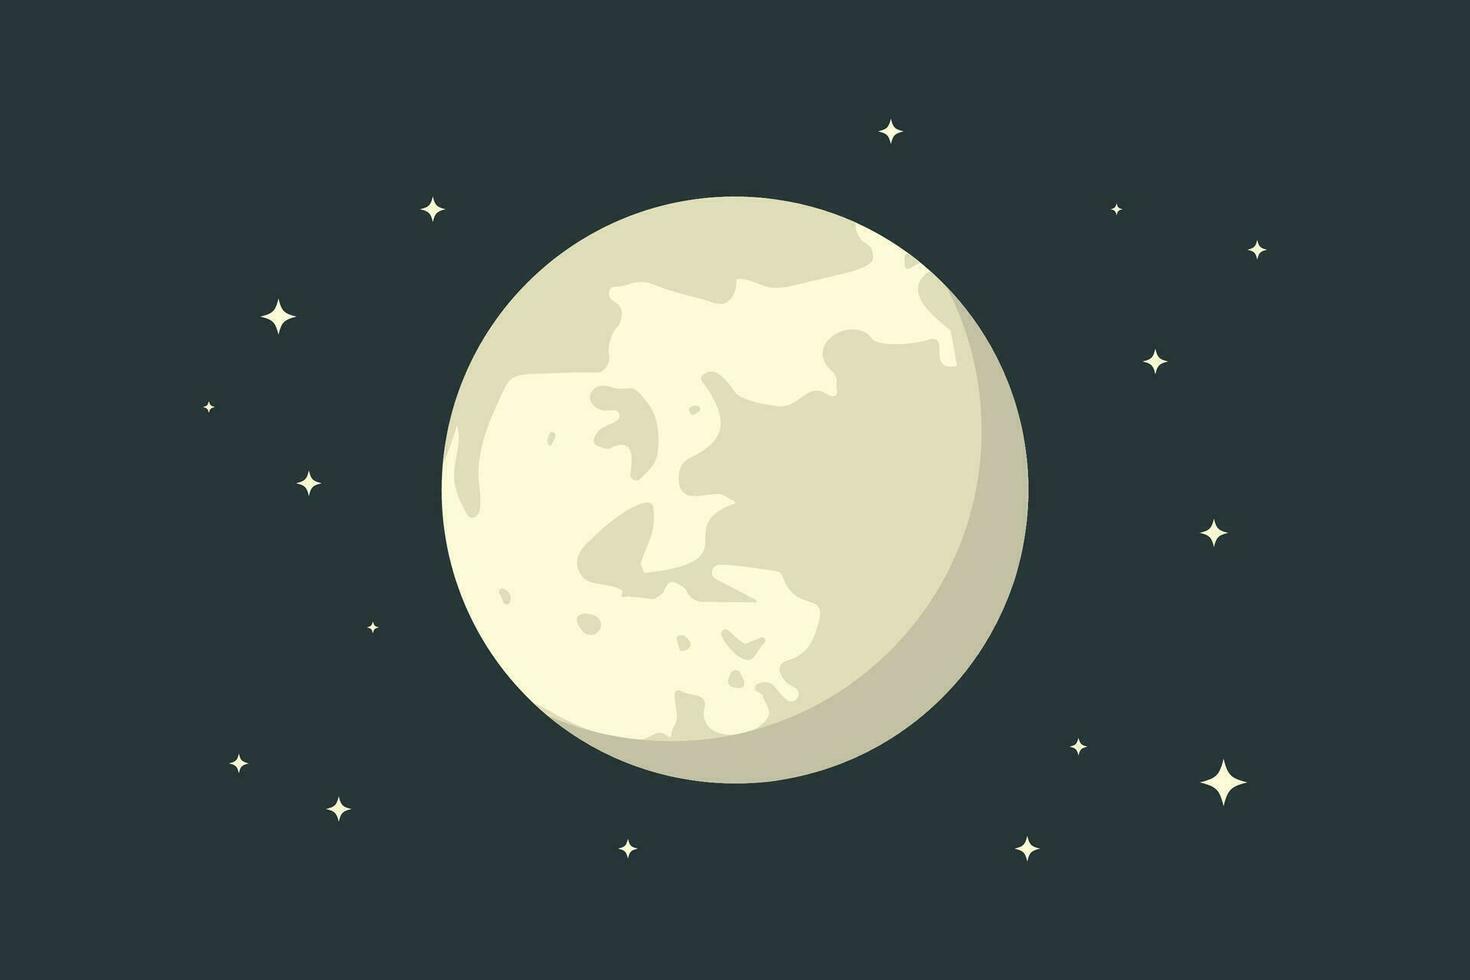 Full moon with stars in outer space background vector